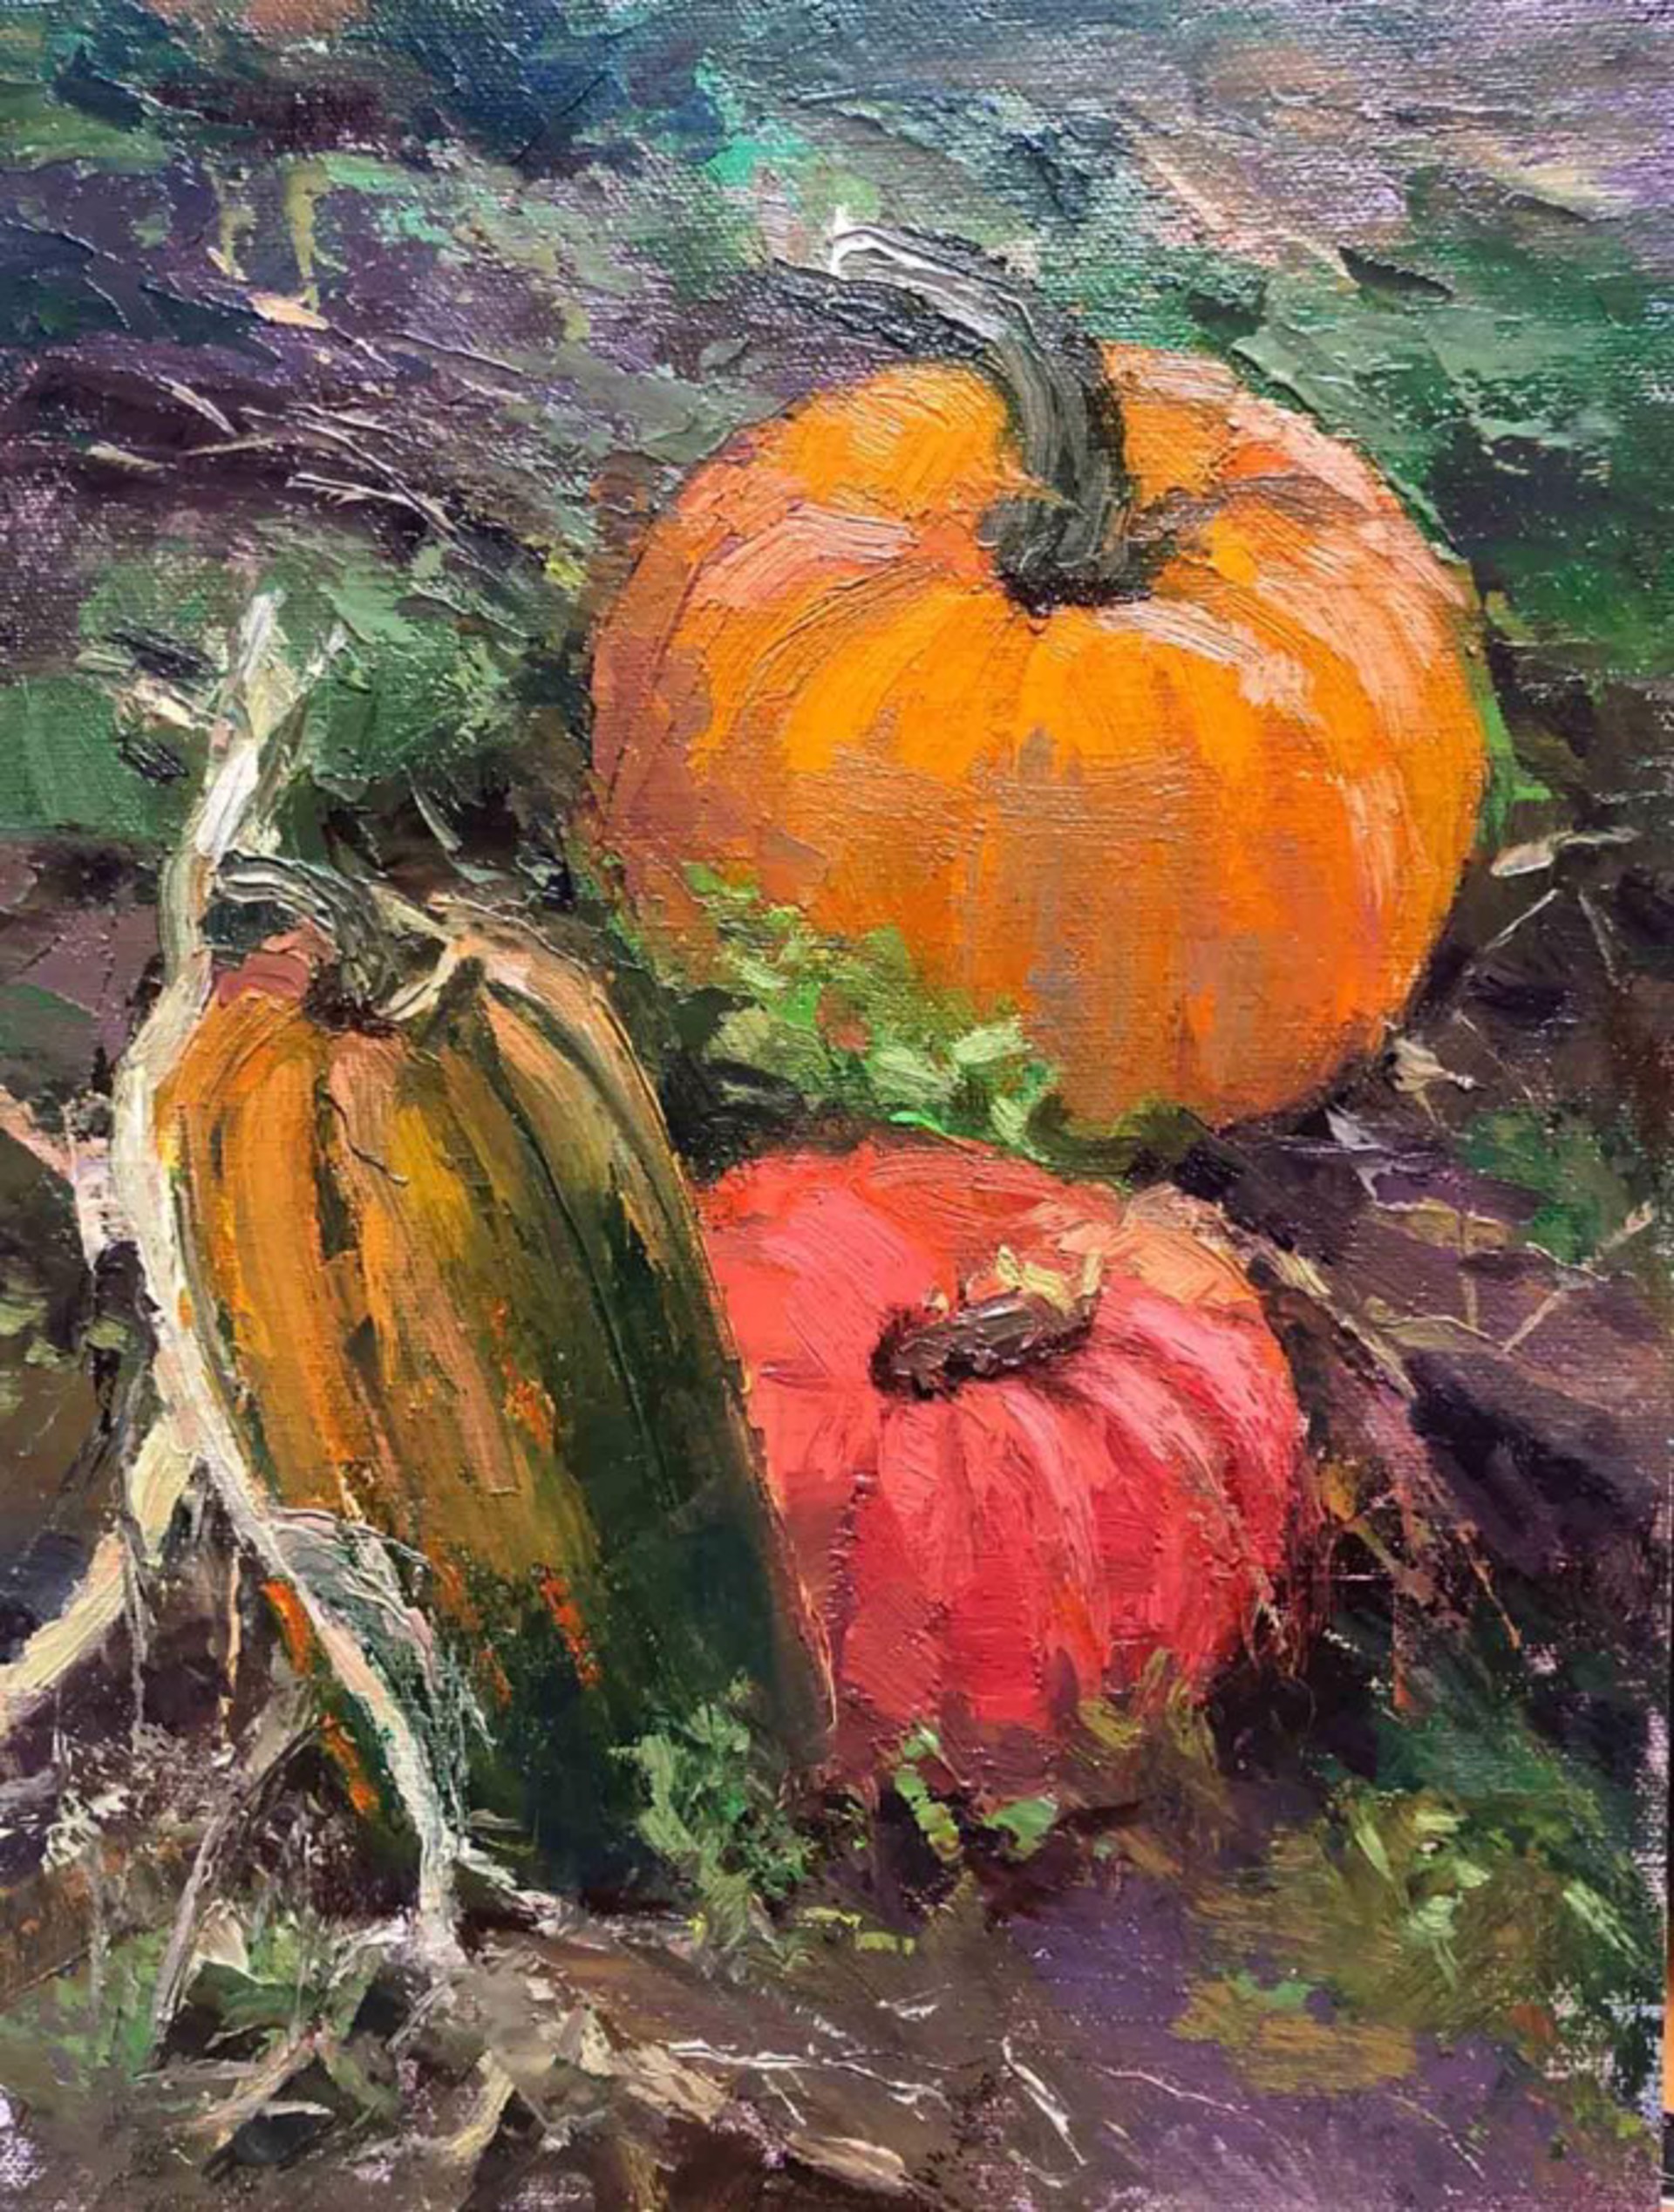 At The Day Road Pumpkin Patch | by Jane Wallis